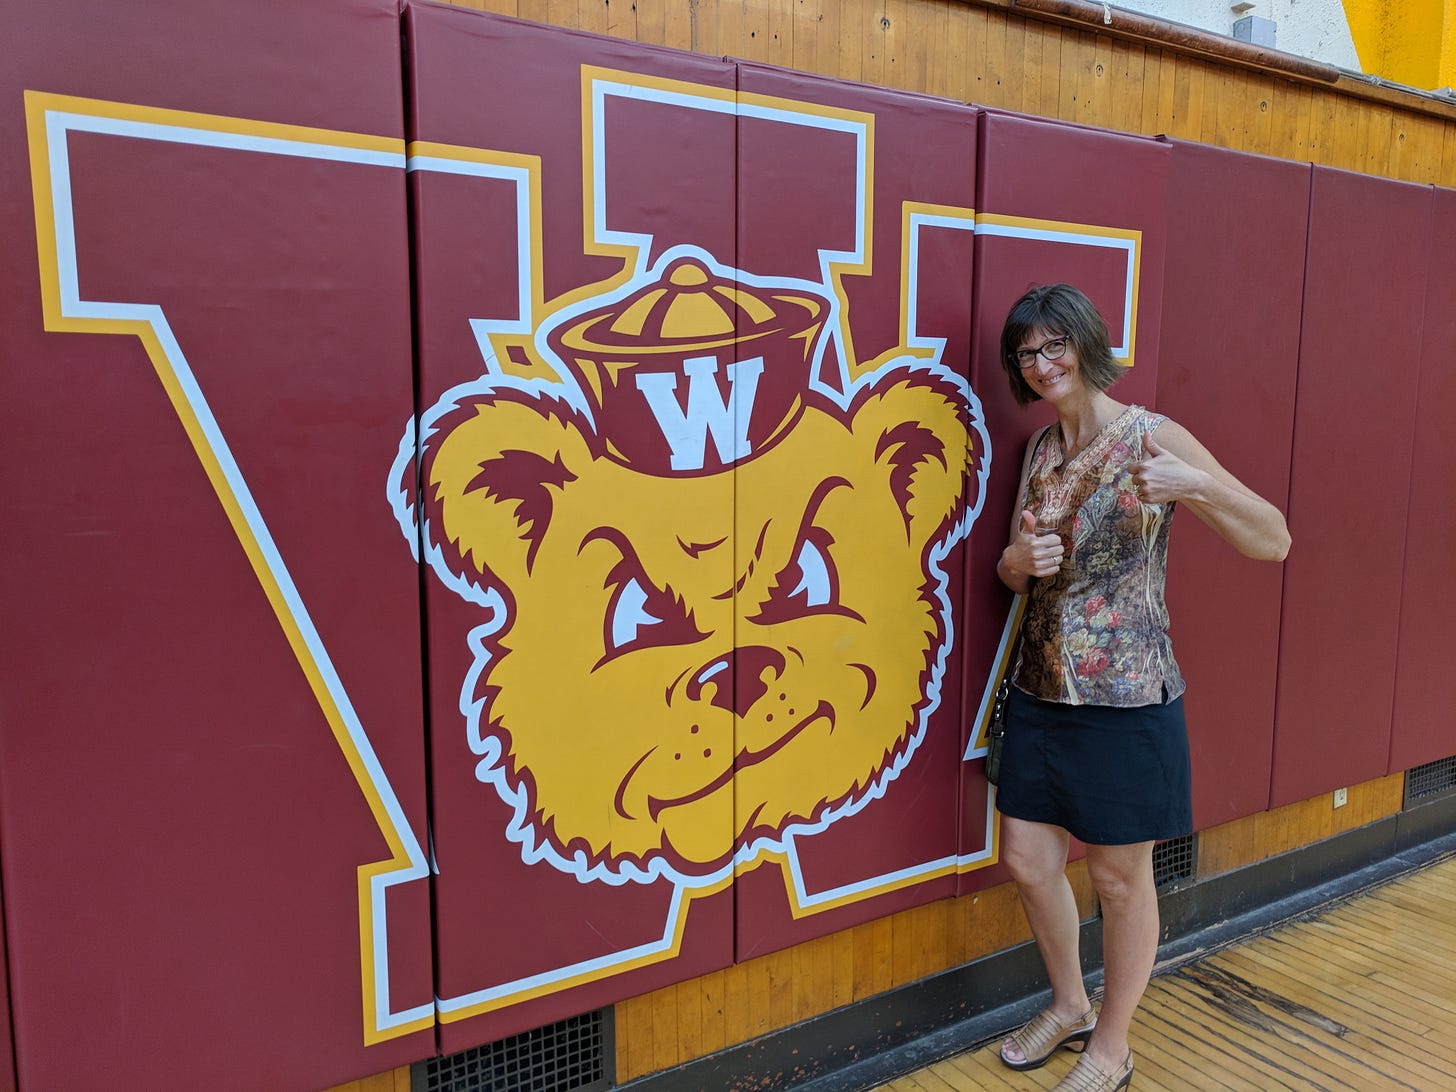 Me standing next to some hanging mats along the wall of a gymnasium, giving a thumbs-up next to a logo featuring the letter W and a grumpy teddy bear mascot